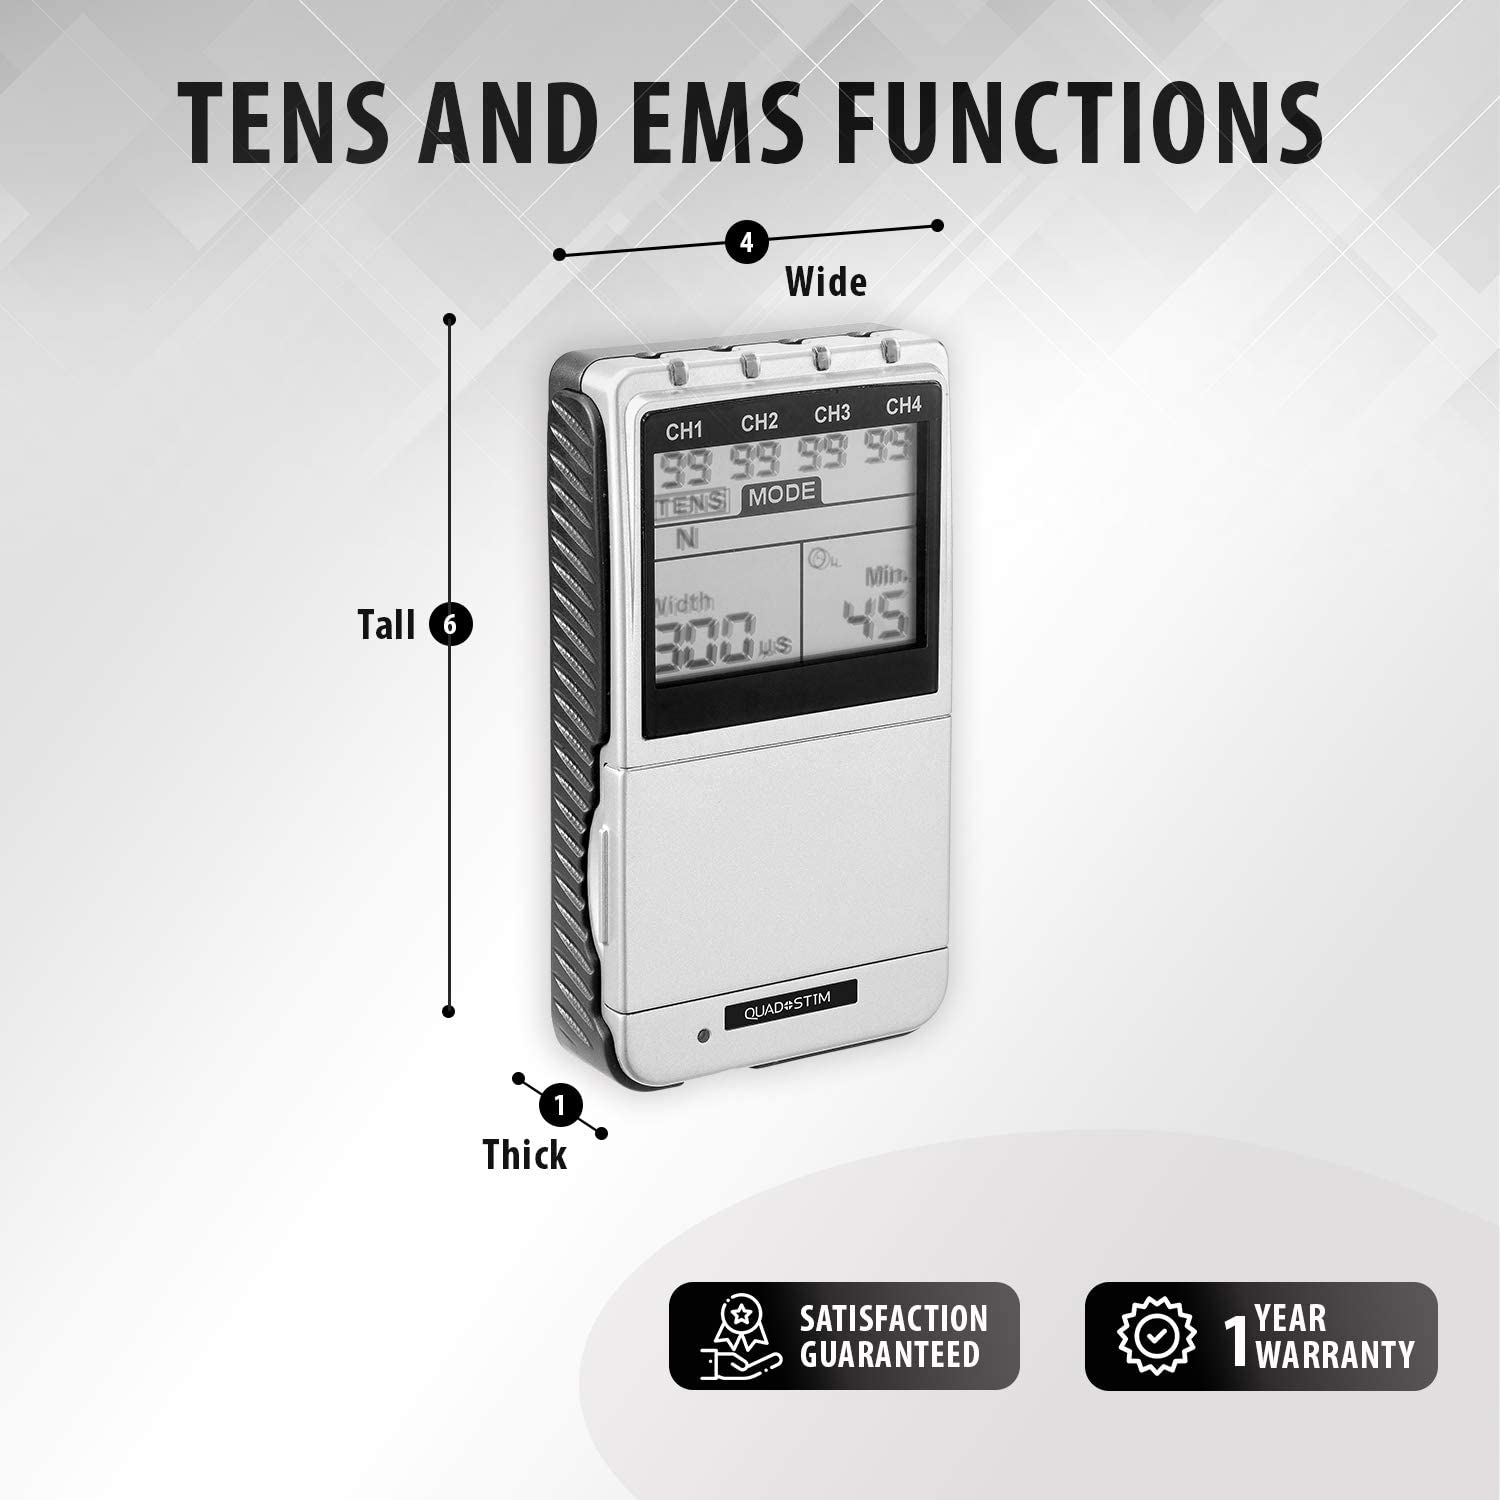 Digital 4-channel EMS/TENS unit, portable/battery or AC adapter